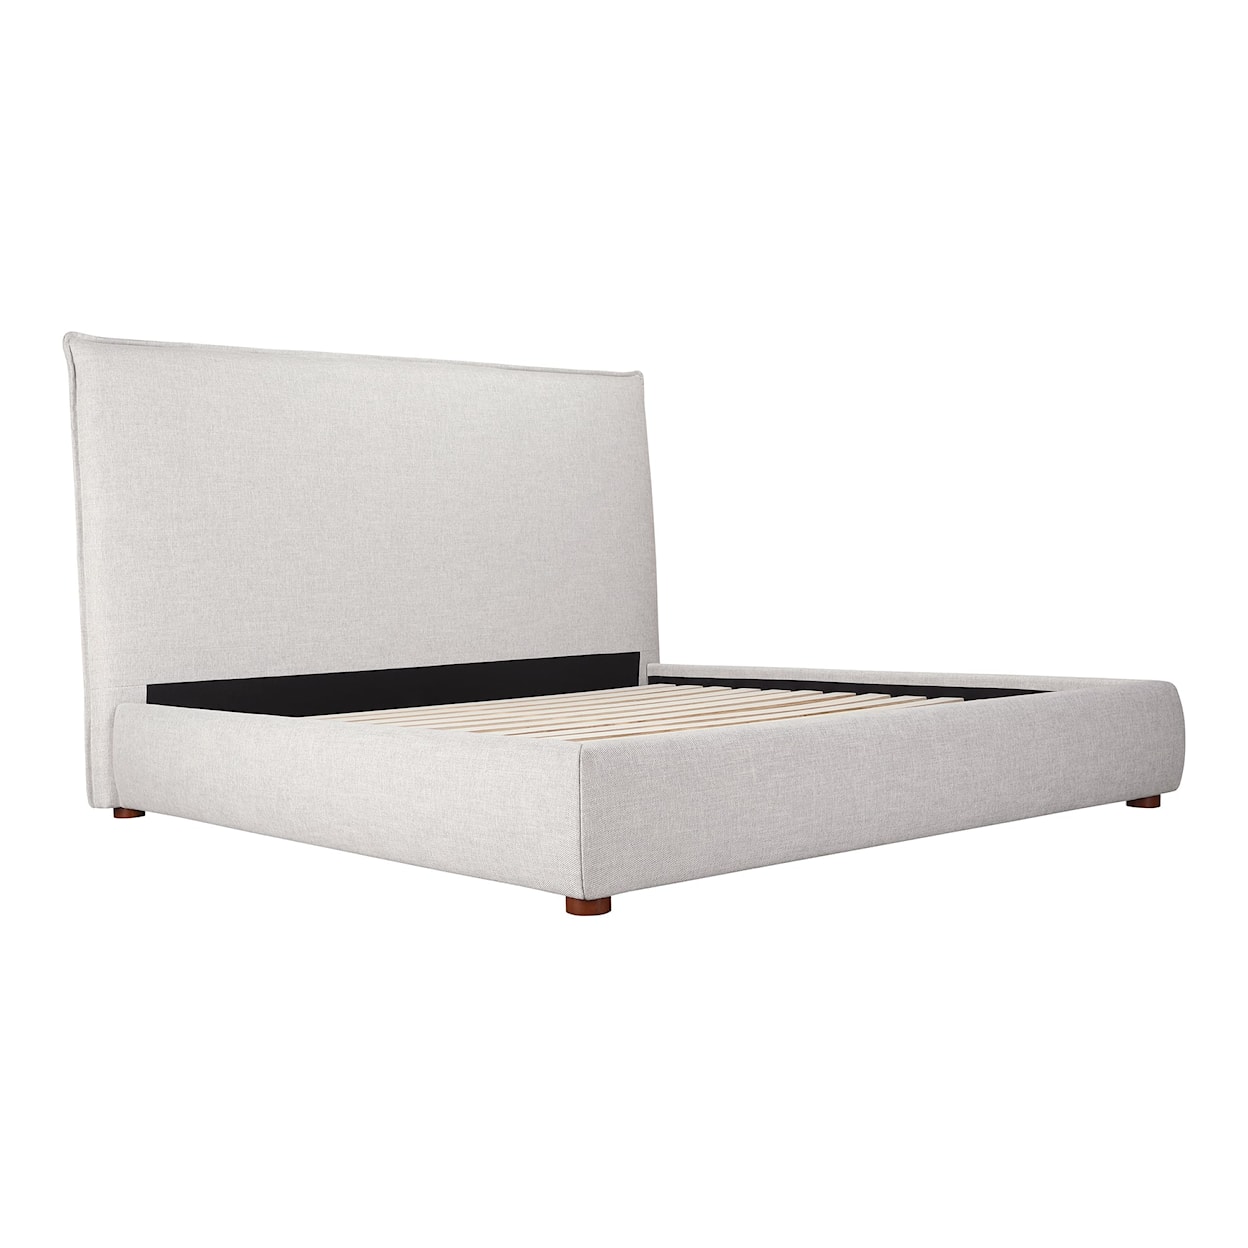 Moe's Home Collection Luzon Upholstered King Bed